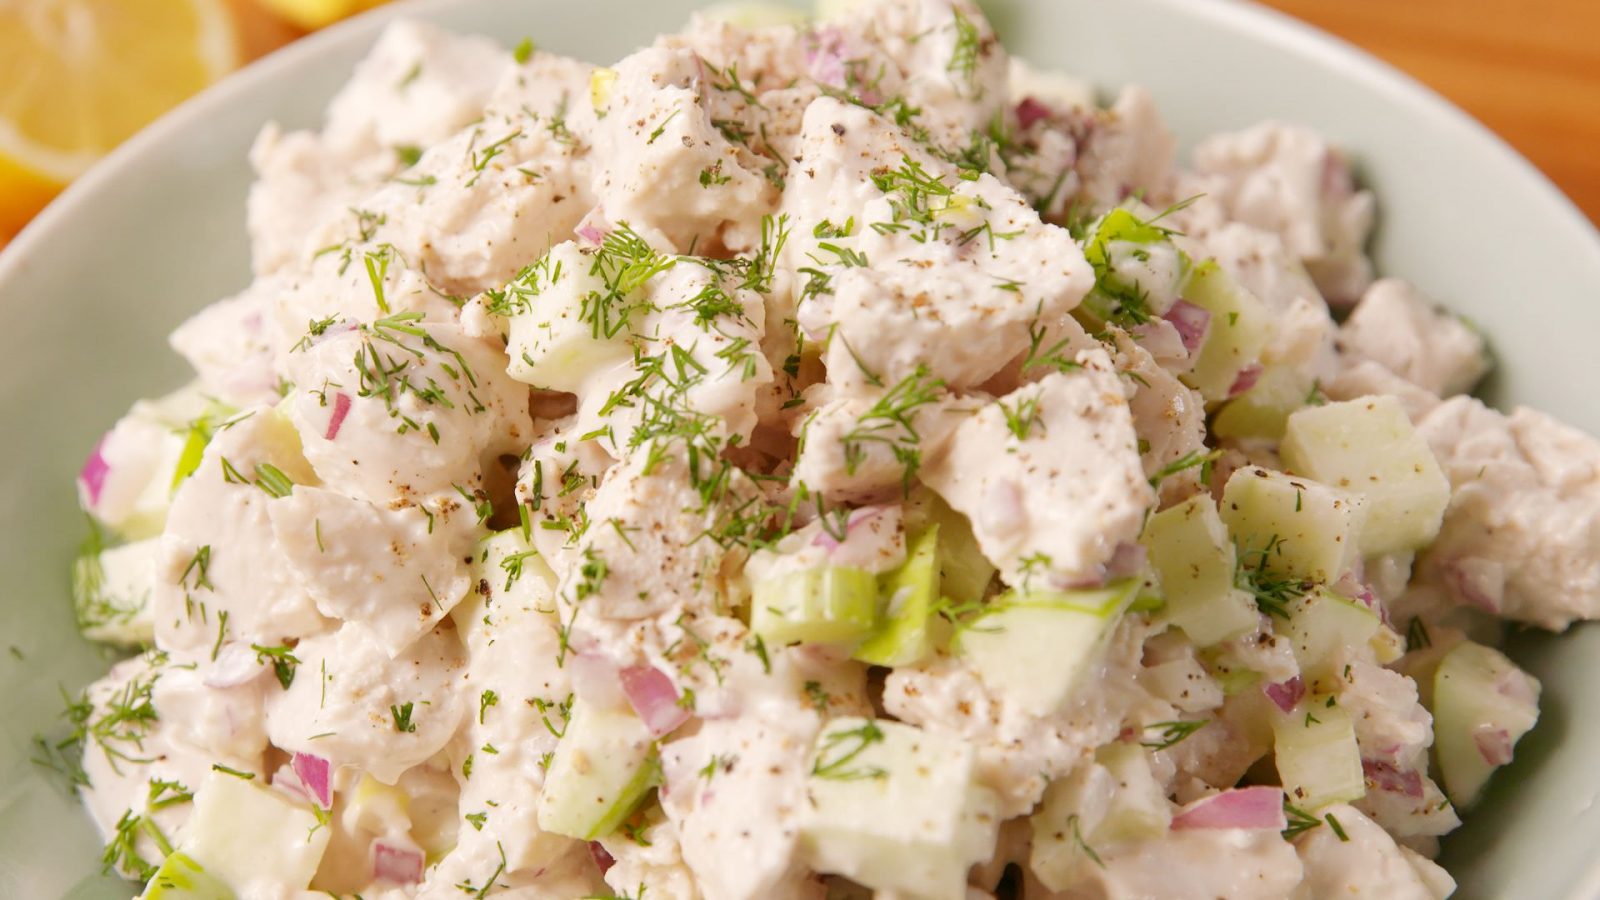 🍗 You’re Only a True Chicken Lover If You’ve Eaten at Least 21/30 of These Foods Creamy chicken salad